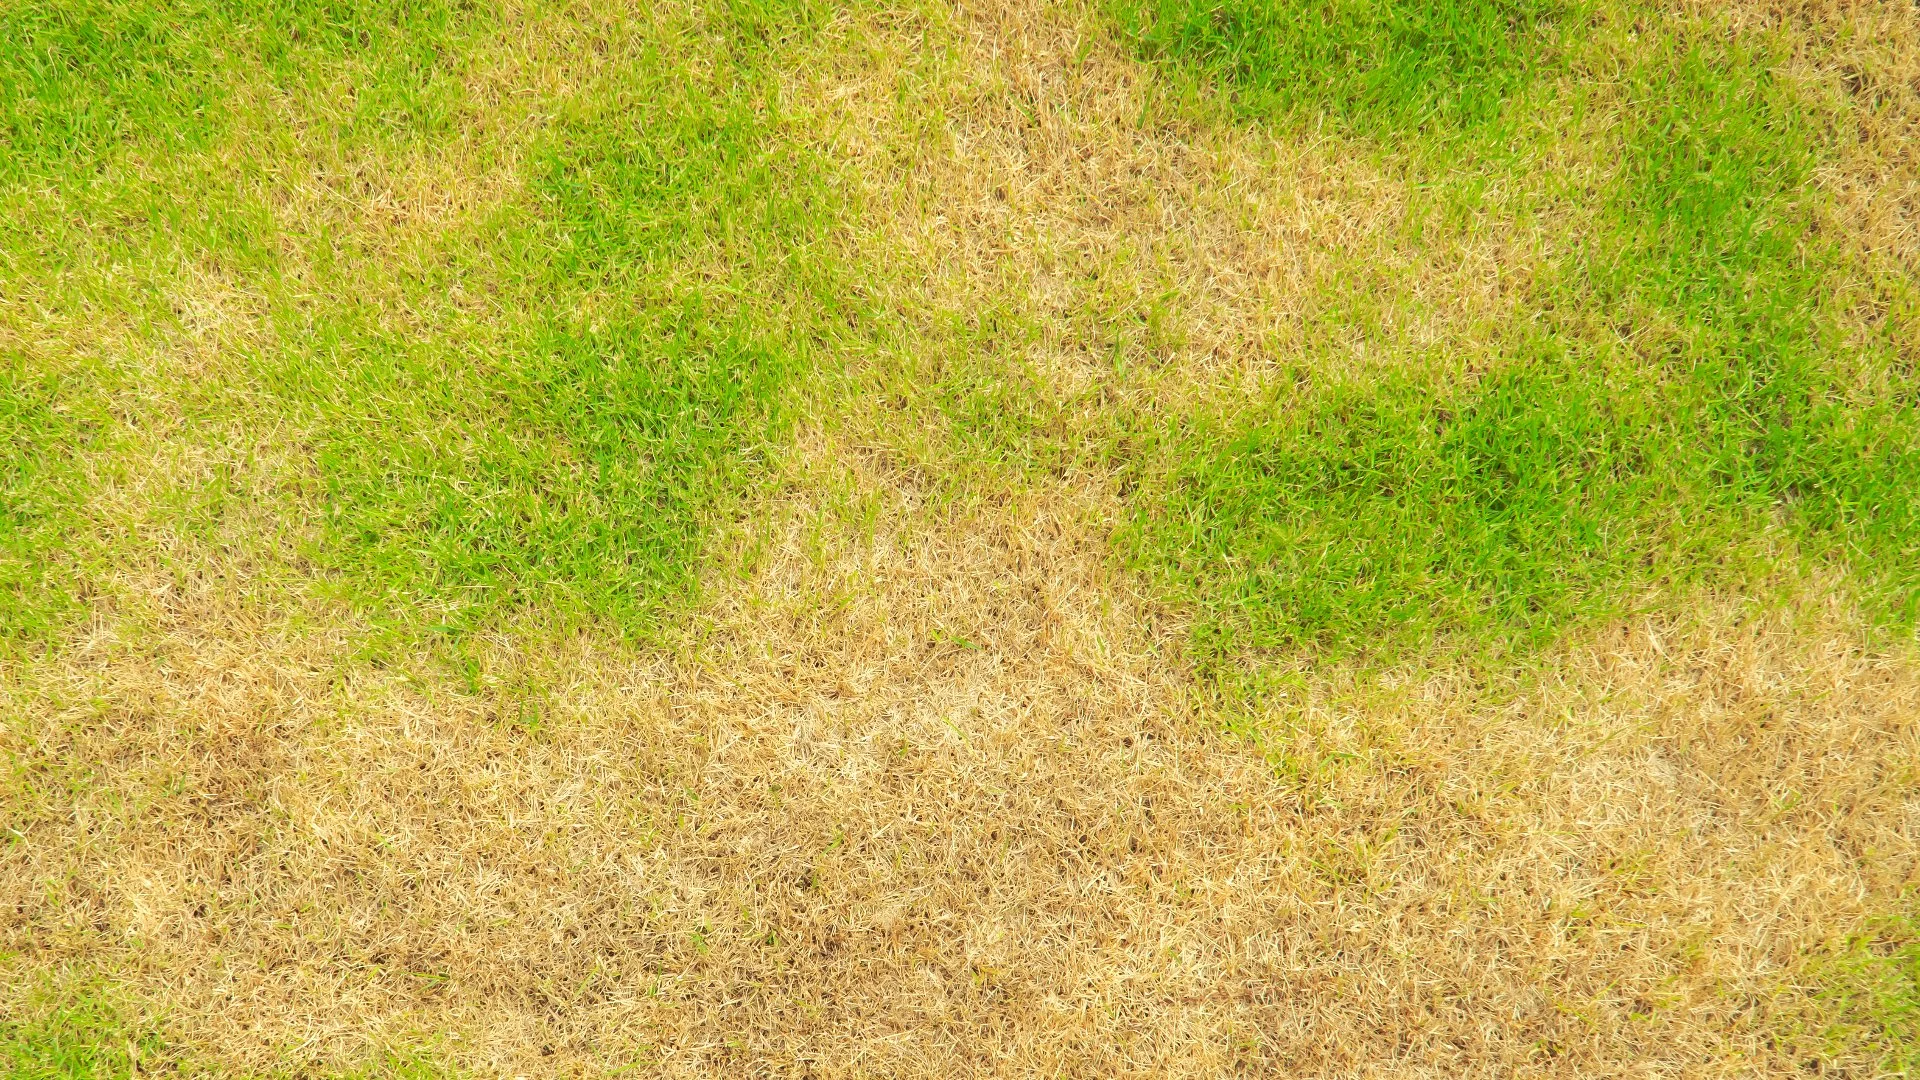 Take-All Root Rot - Everything You Need to Know About This Common Lawn Disease in Texas